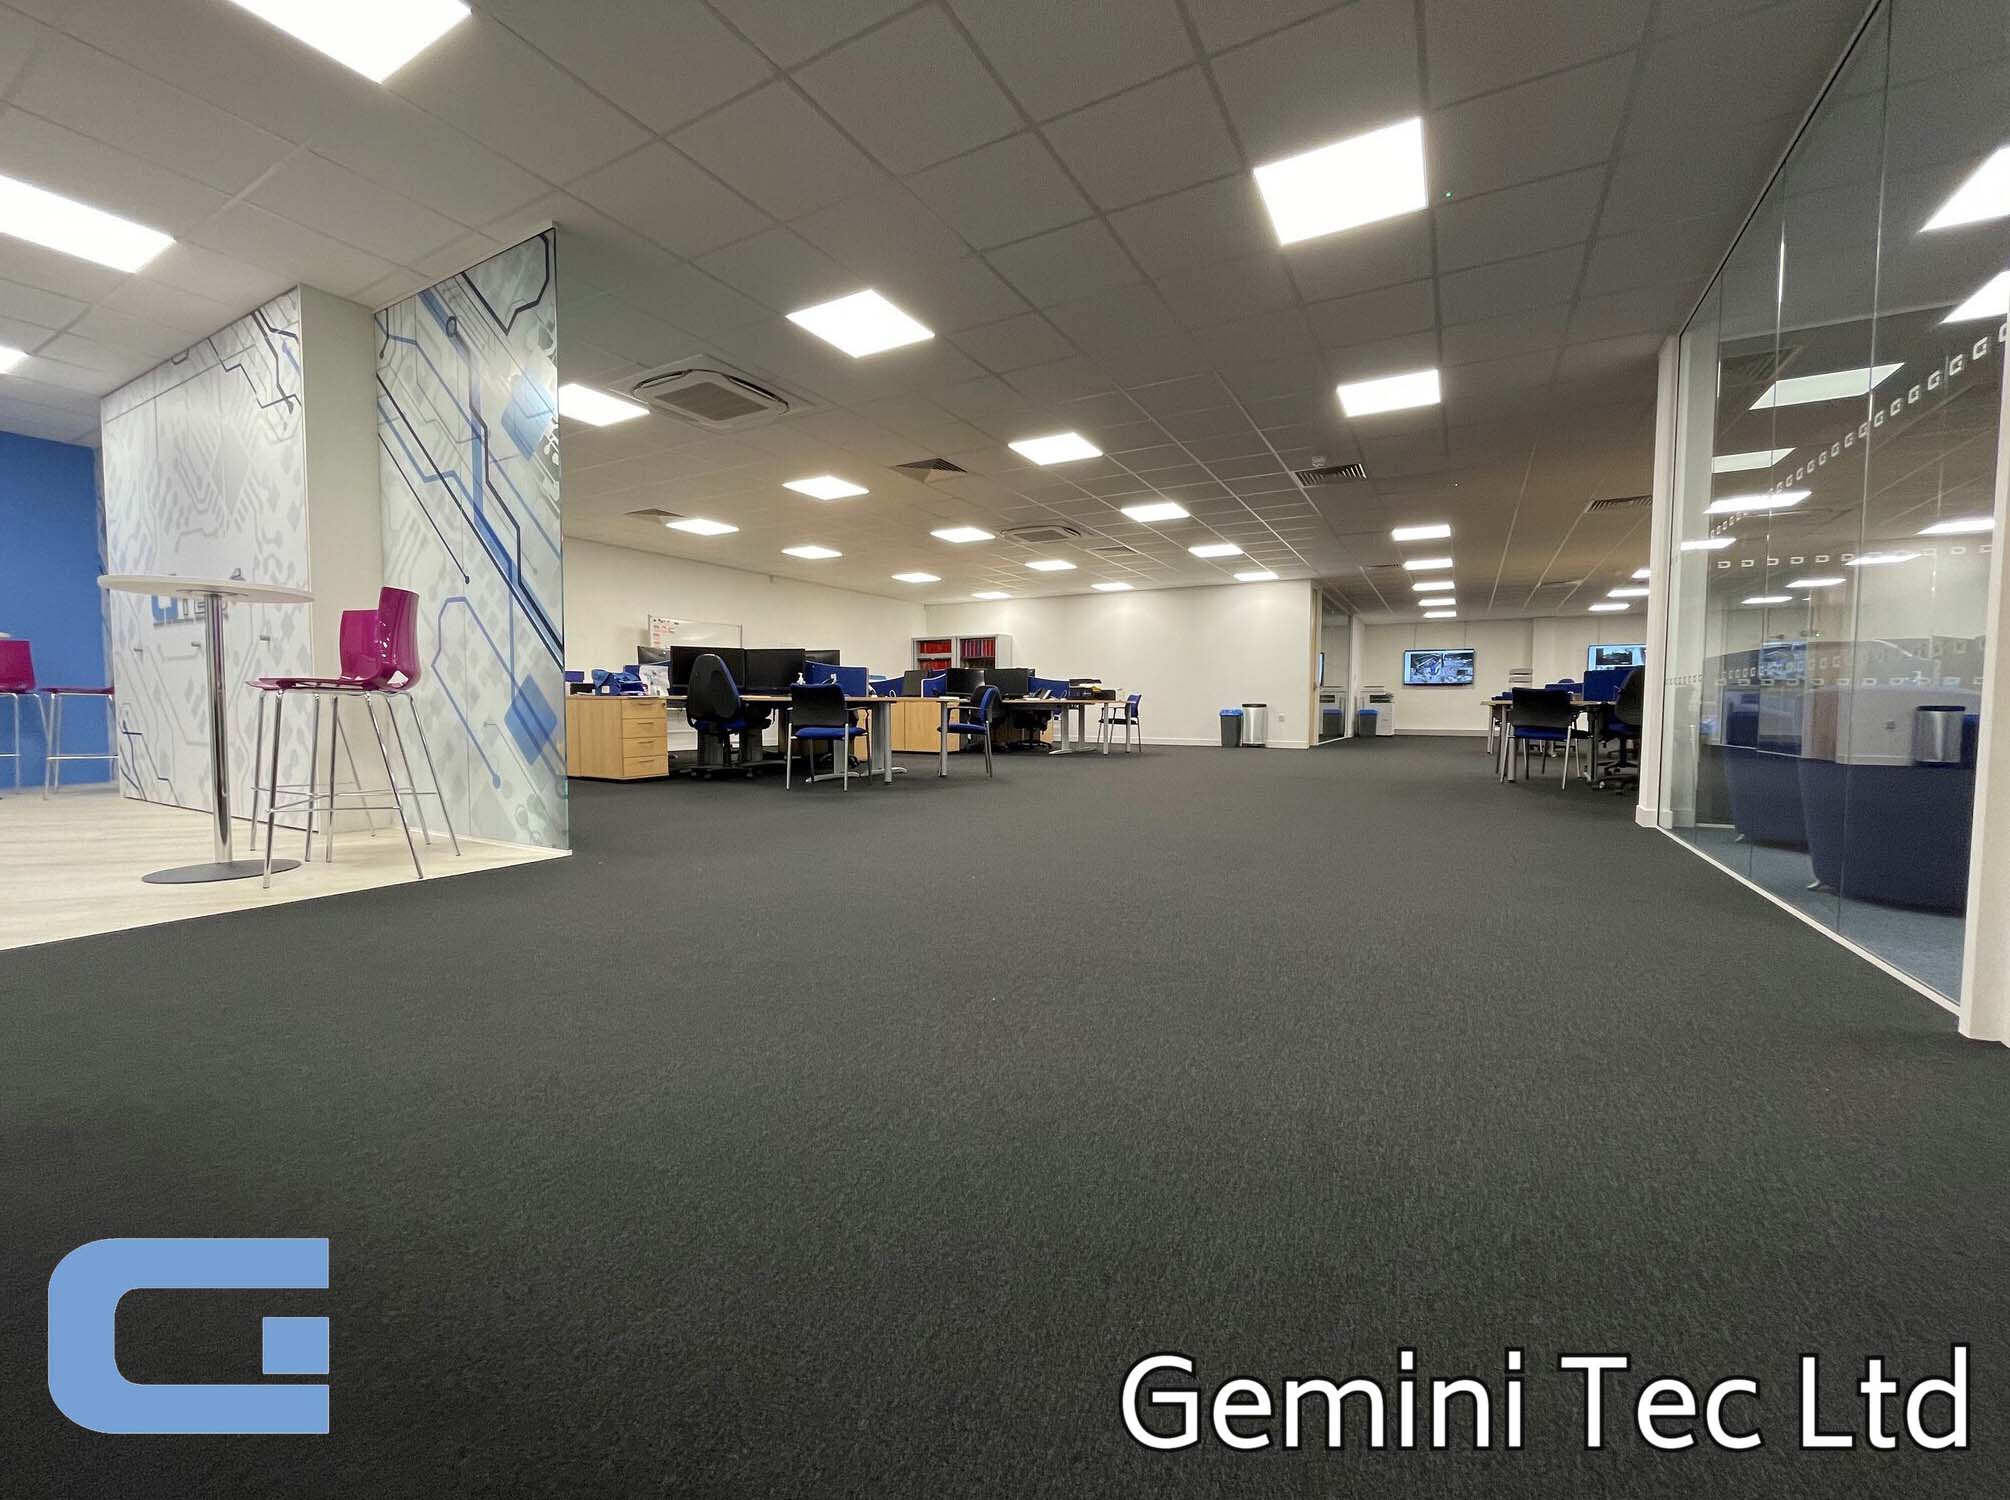 Major expansion with new 10,000 sqft facility for 2021 at Gemini Tec Ltd